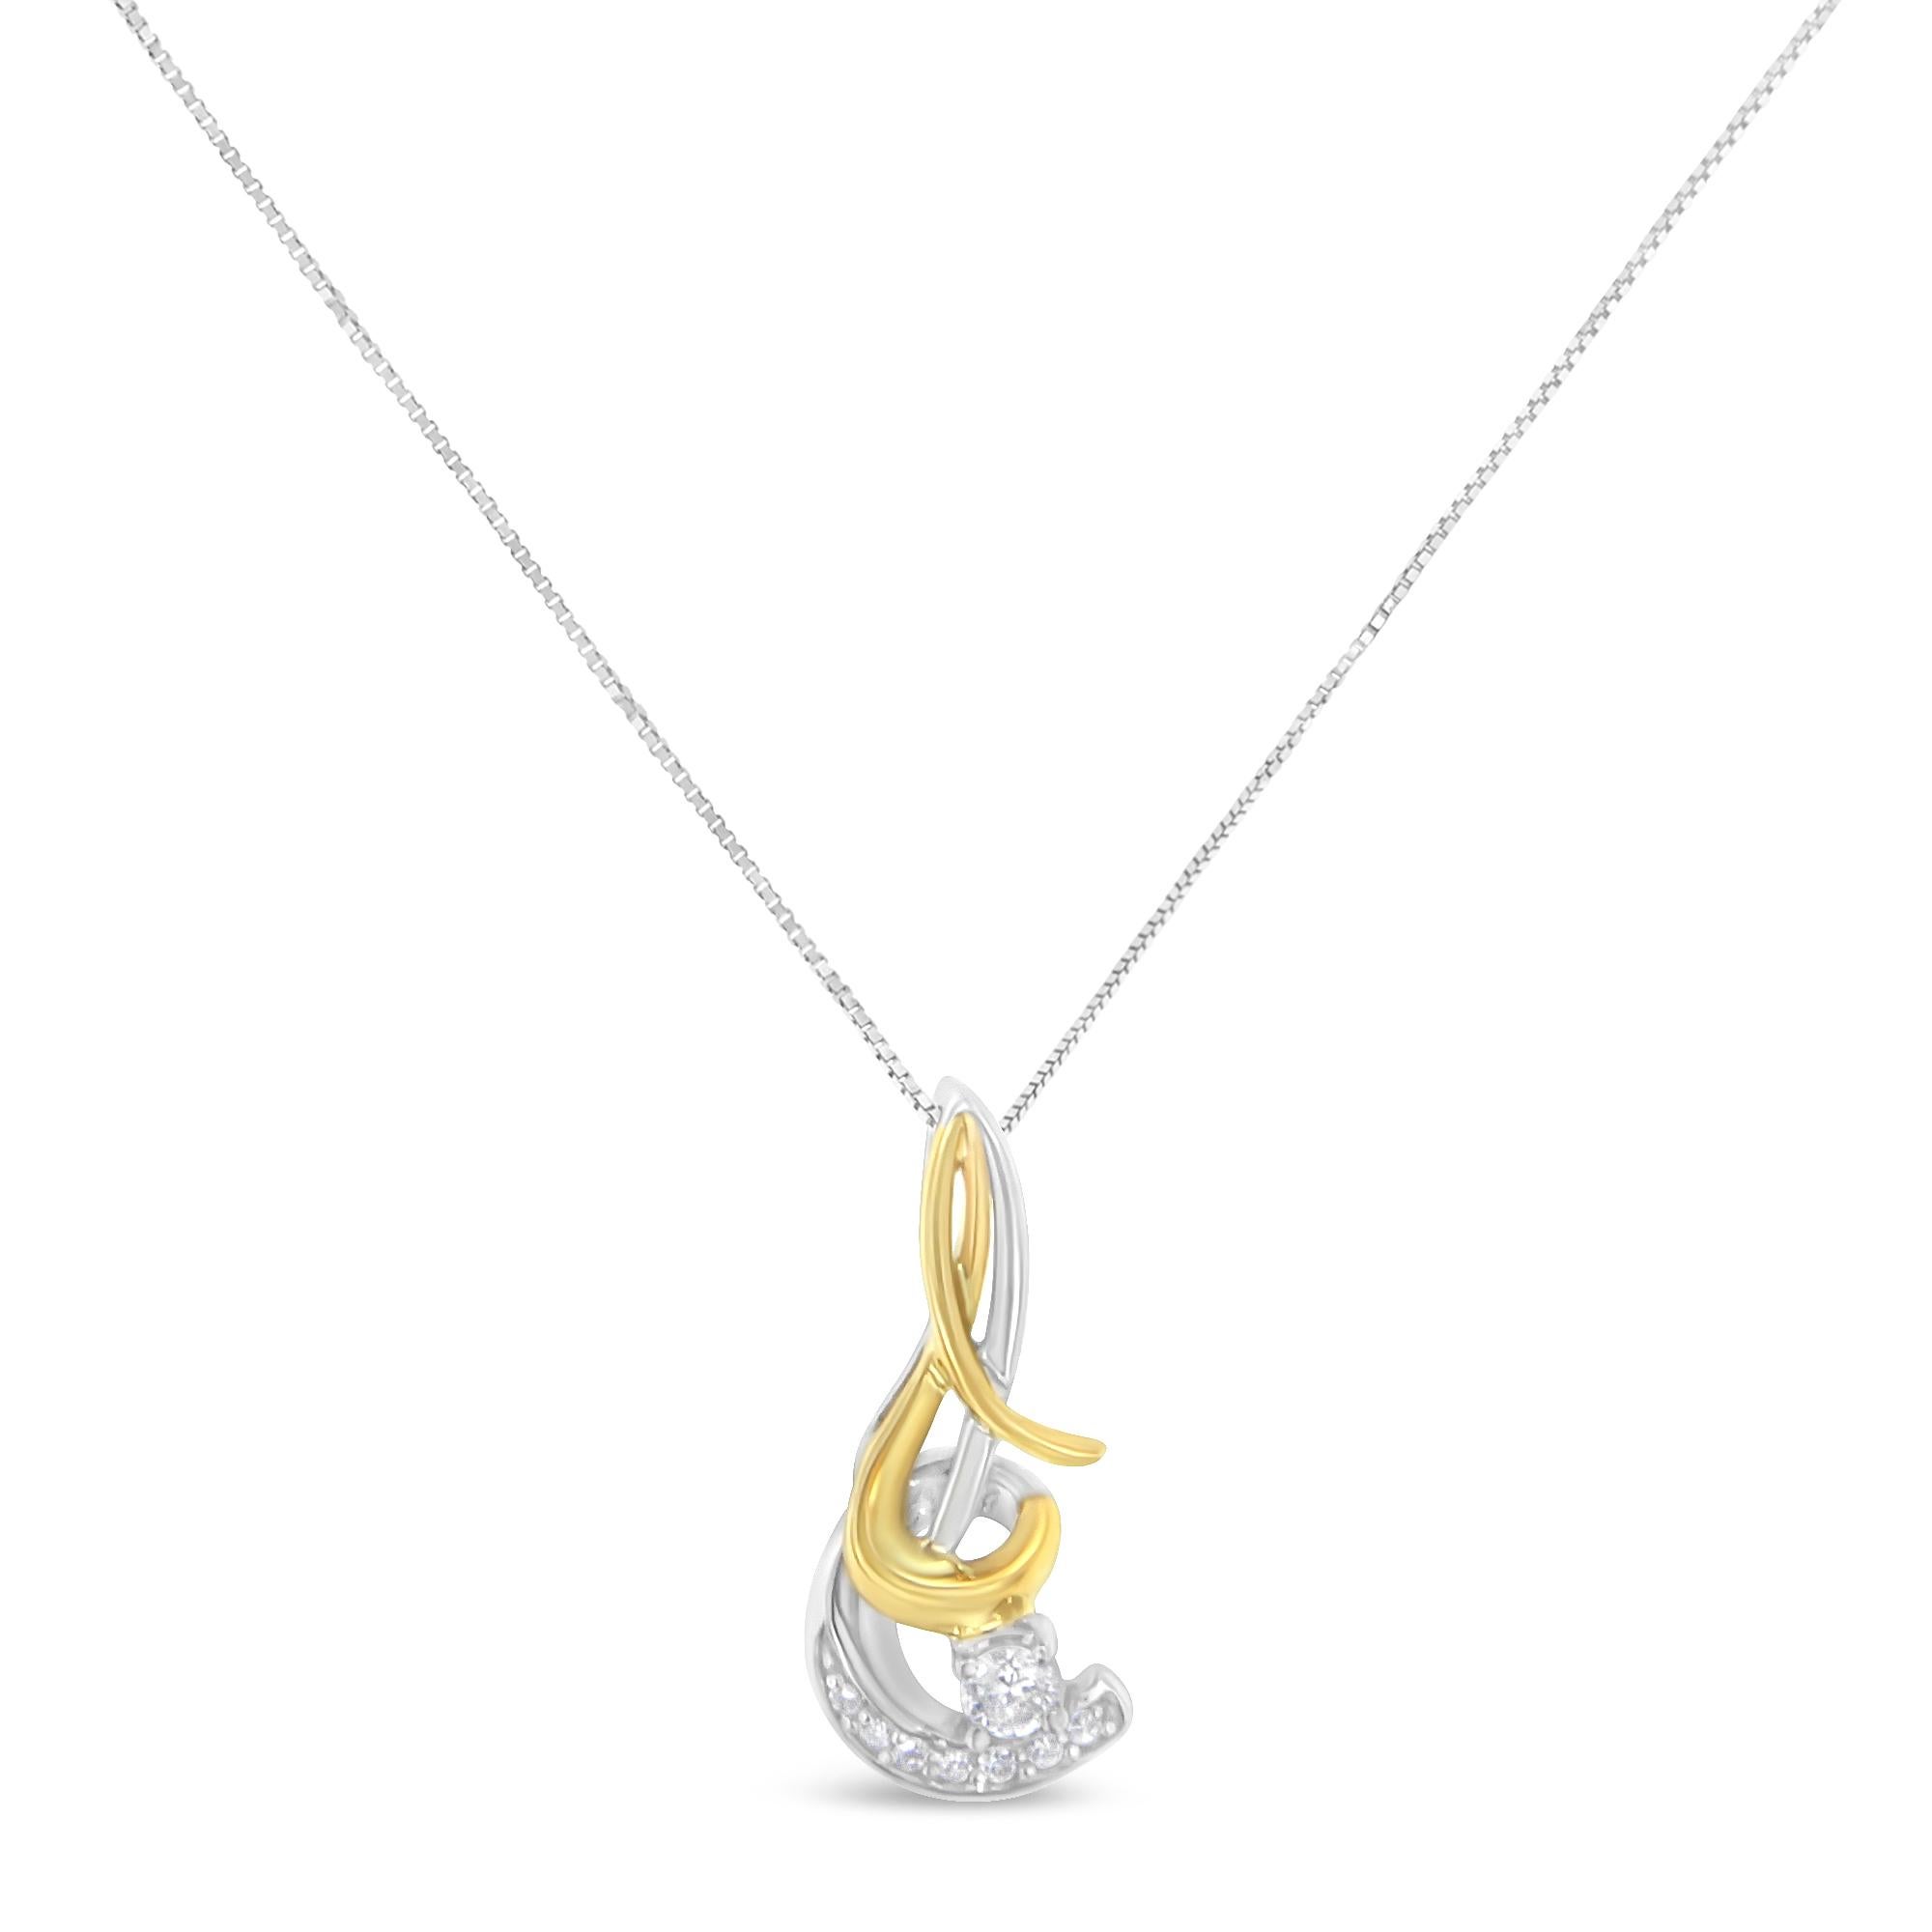 A swirl of white and yellow gold creates a stunning spiral effect, making this pendant a true standout. With a scattering of diamonds throughout—and one larger round cut diamond cradled in between—this is one style she needs to have in her jewelry